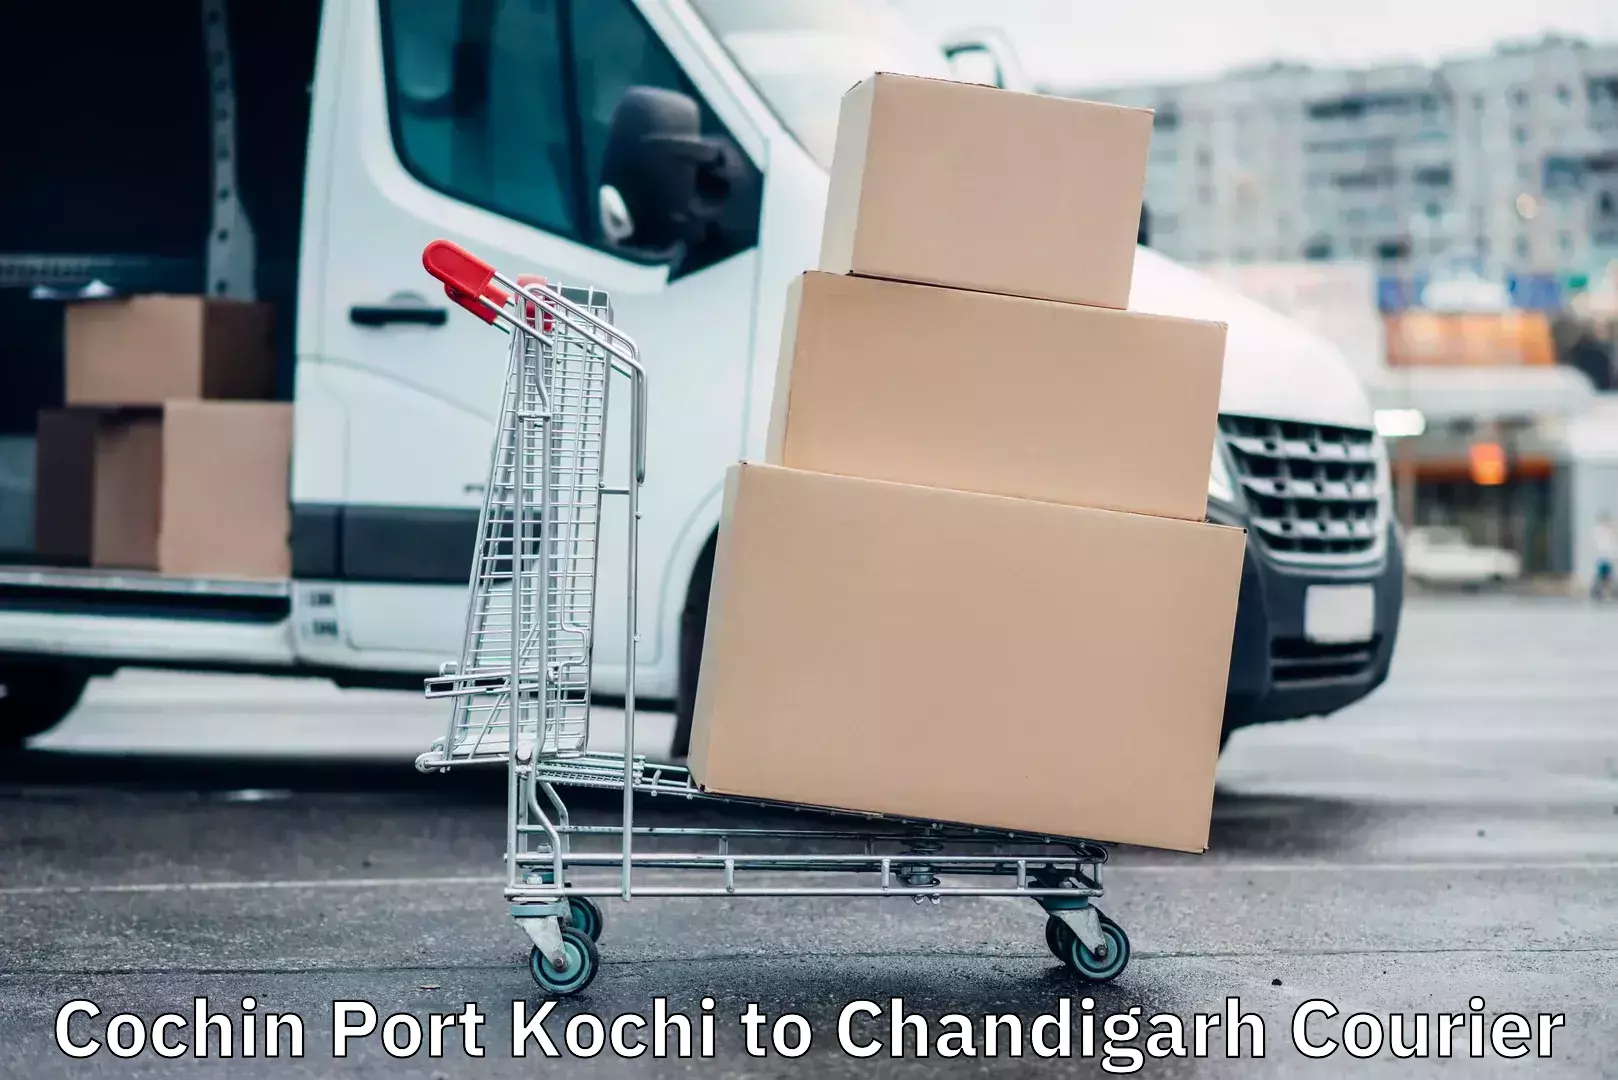 Overnight delivery services Cochin Port Kochi to Chandigarh